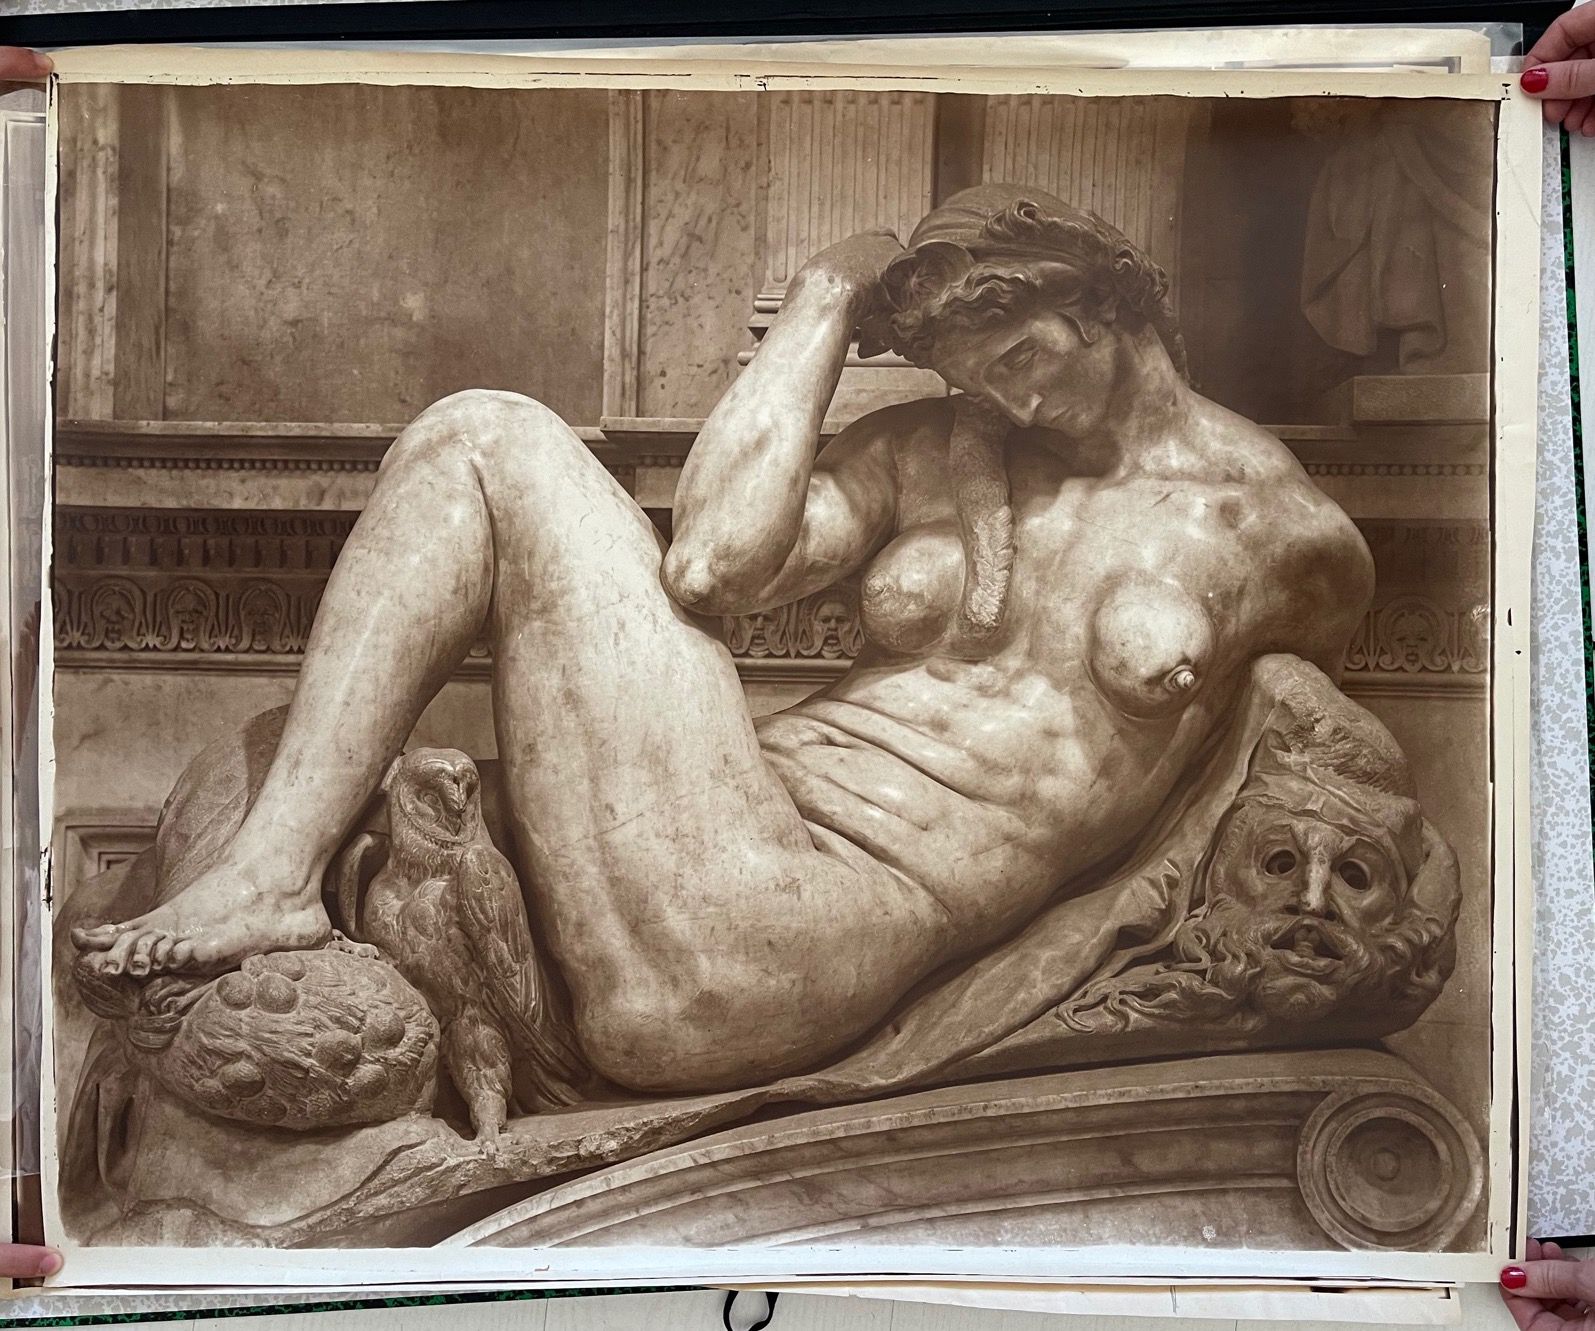 Adolphe Braun (1812-1877) after Michelangelo (1475-1564) Statues of the Day and &hellip;